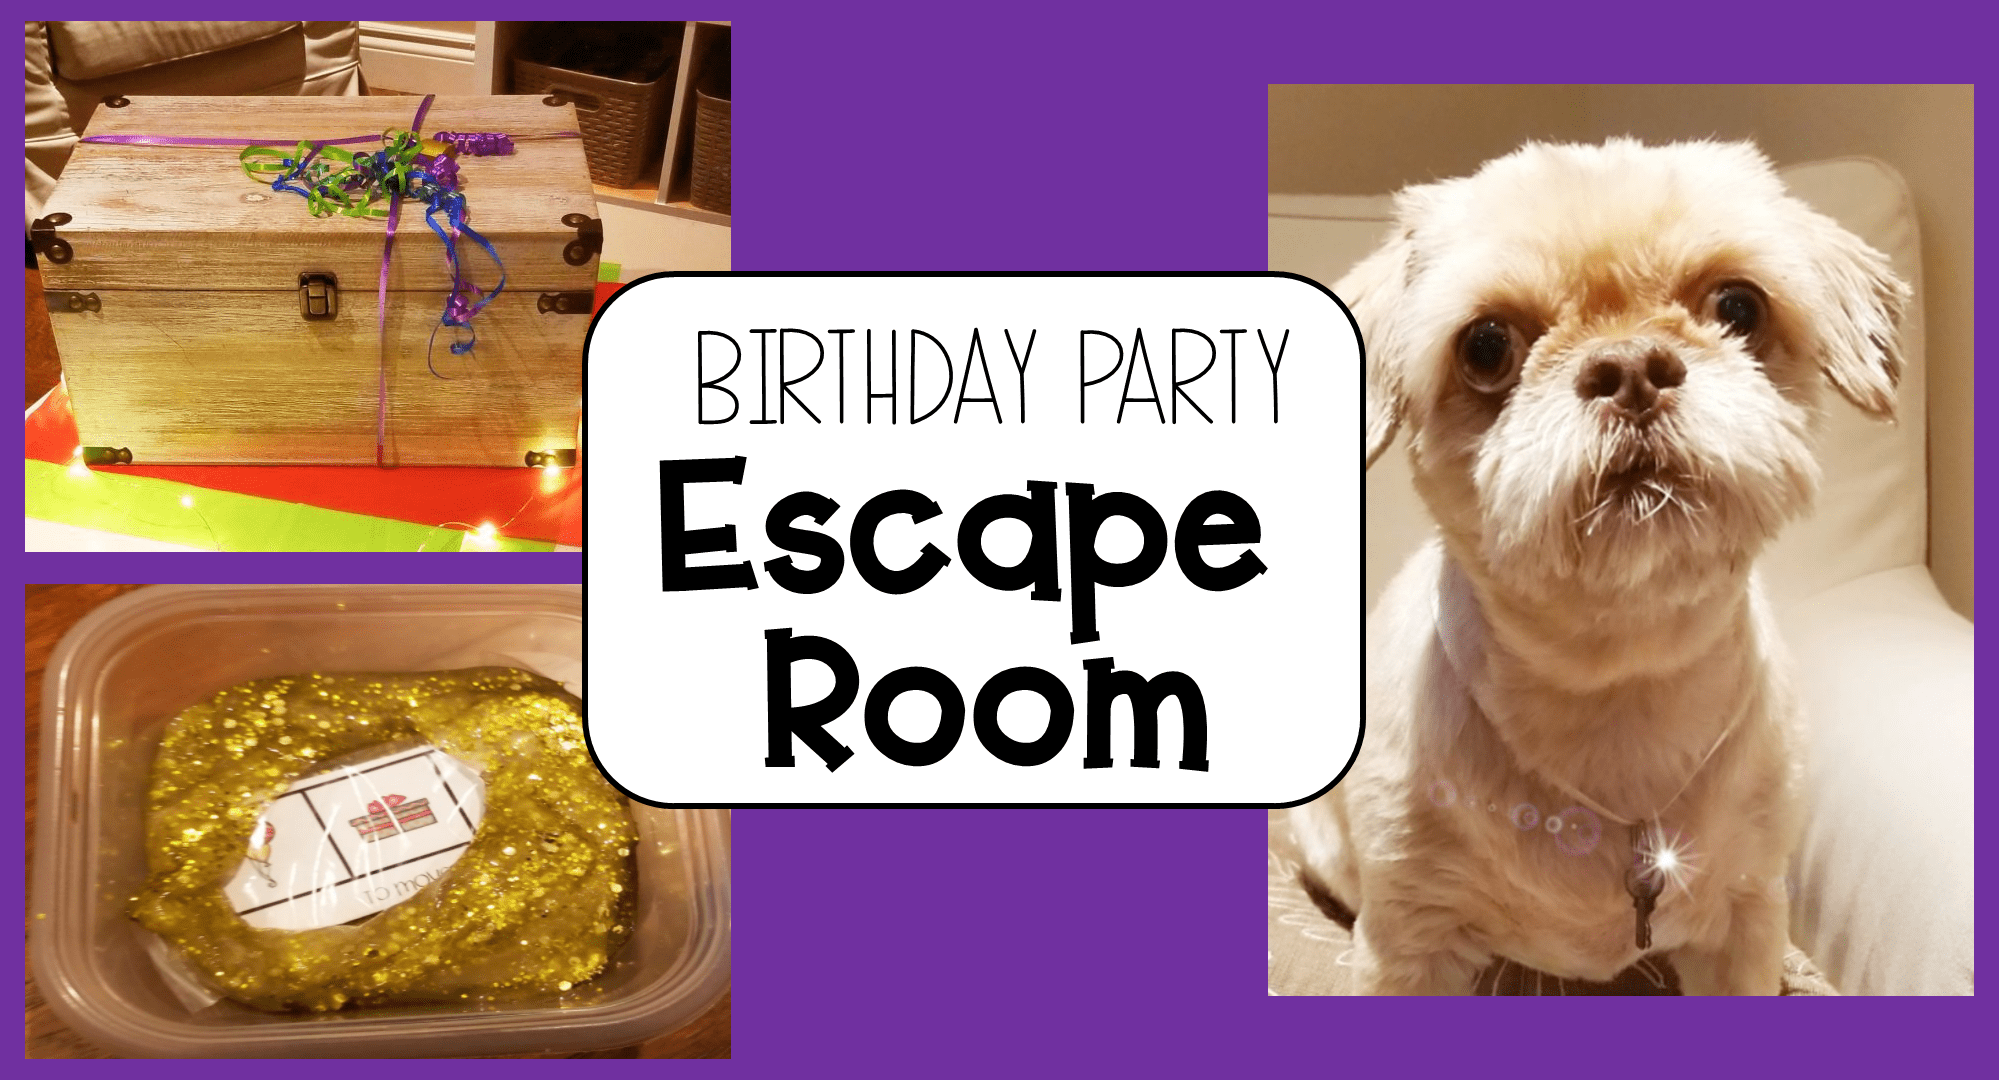 Birthday Party Escape Room for Kids